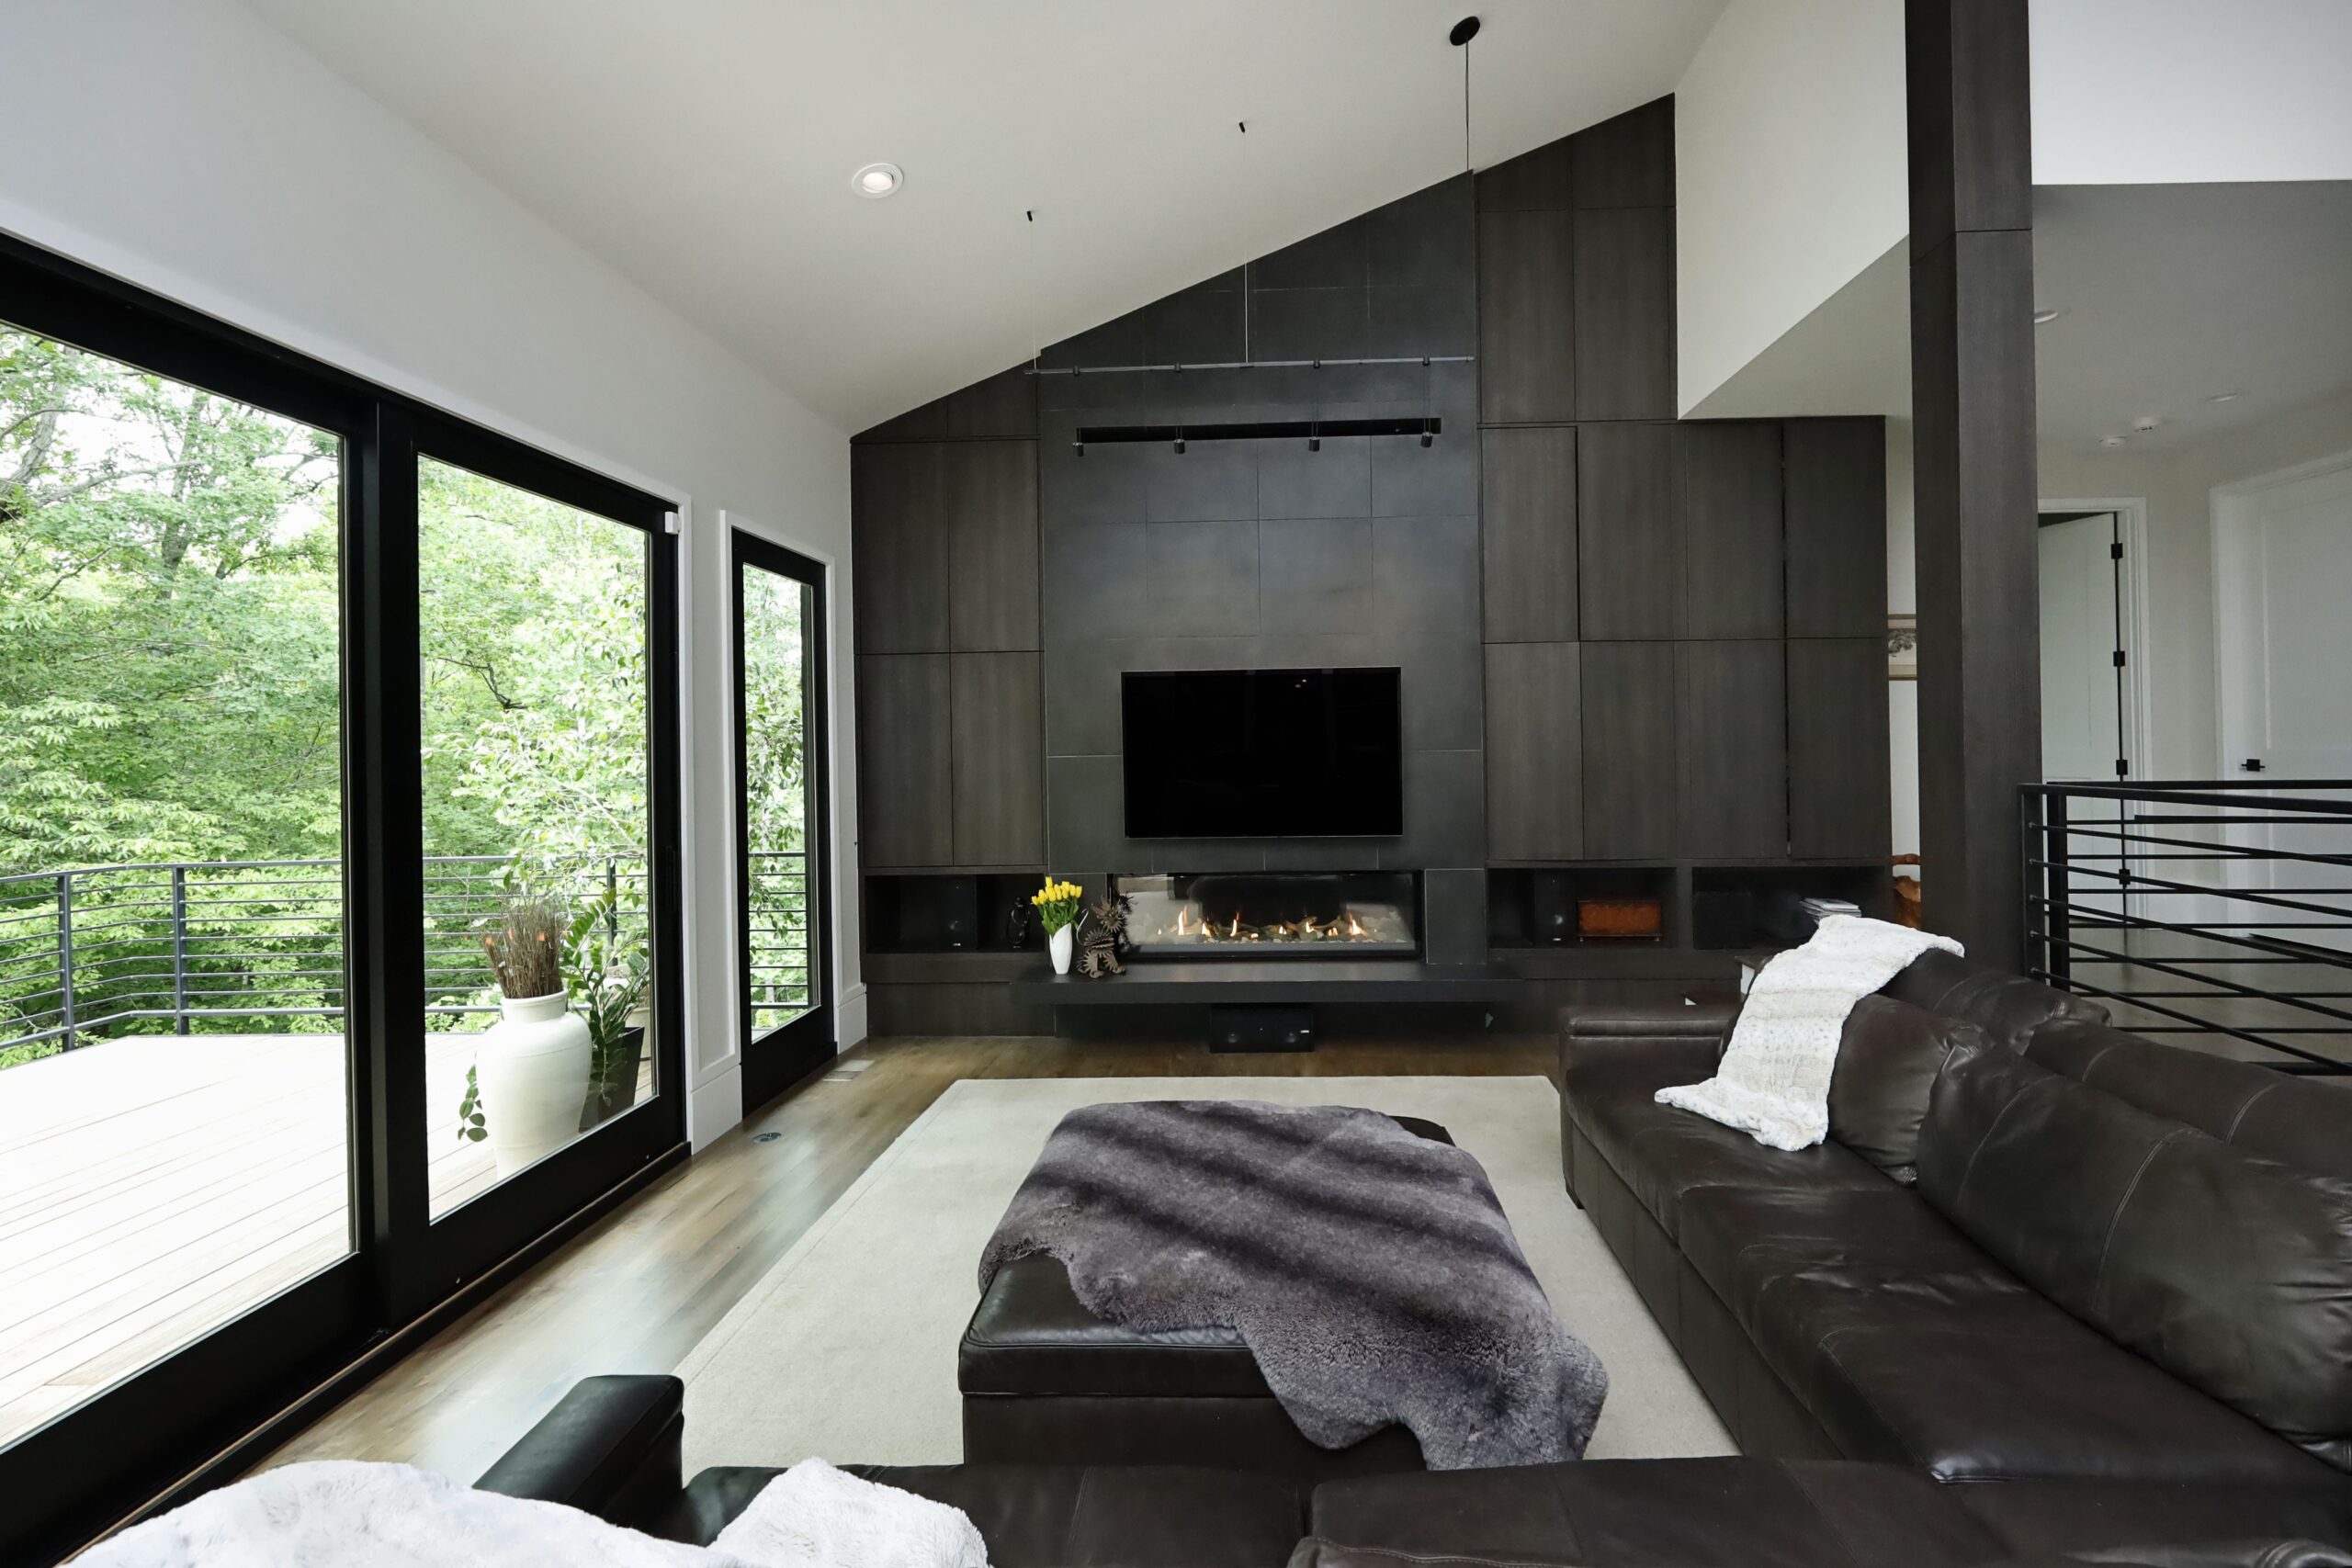 Large sliding doors connect the living room to the deck. Dark wood floor-to-ceiling built-ins with a linear gas fireplace create an elegant and timeless living space.